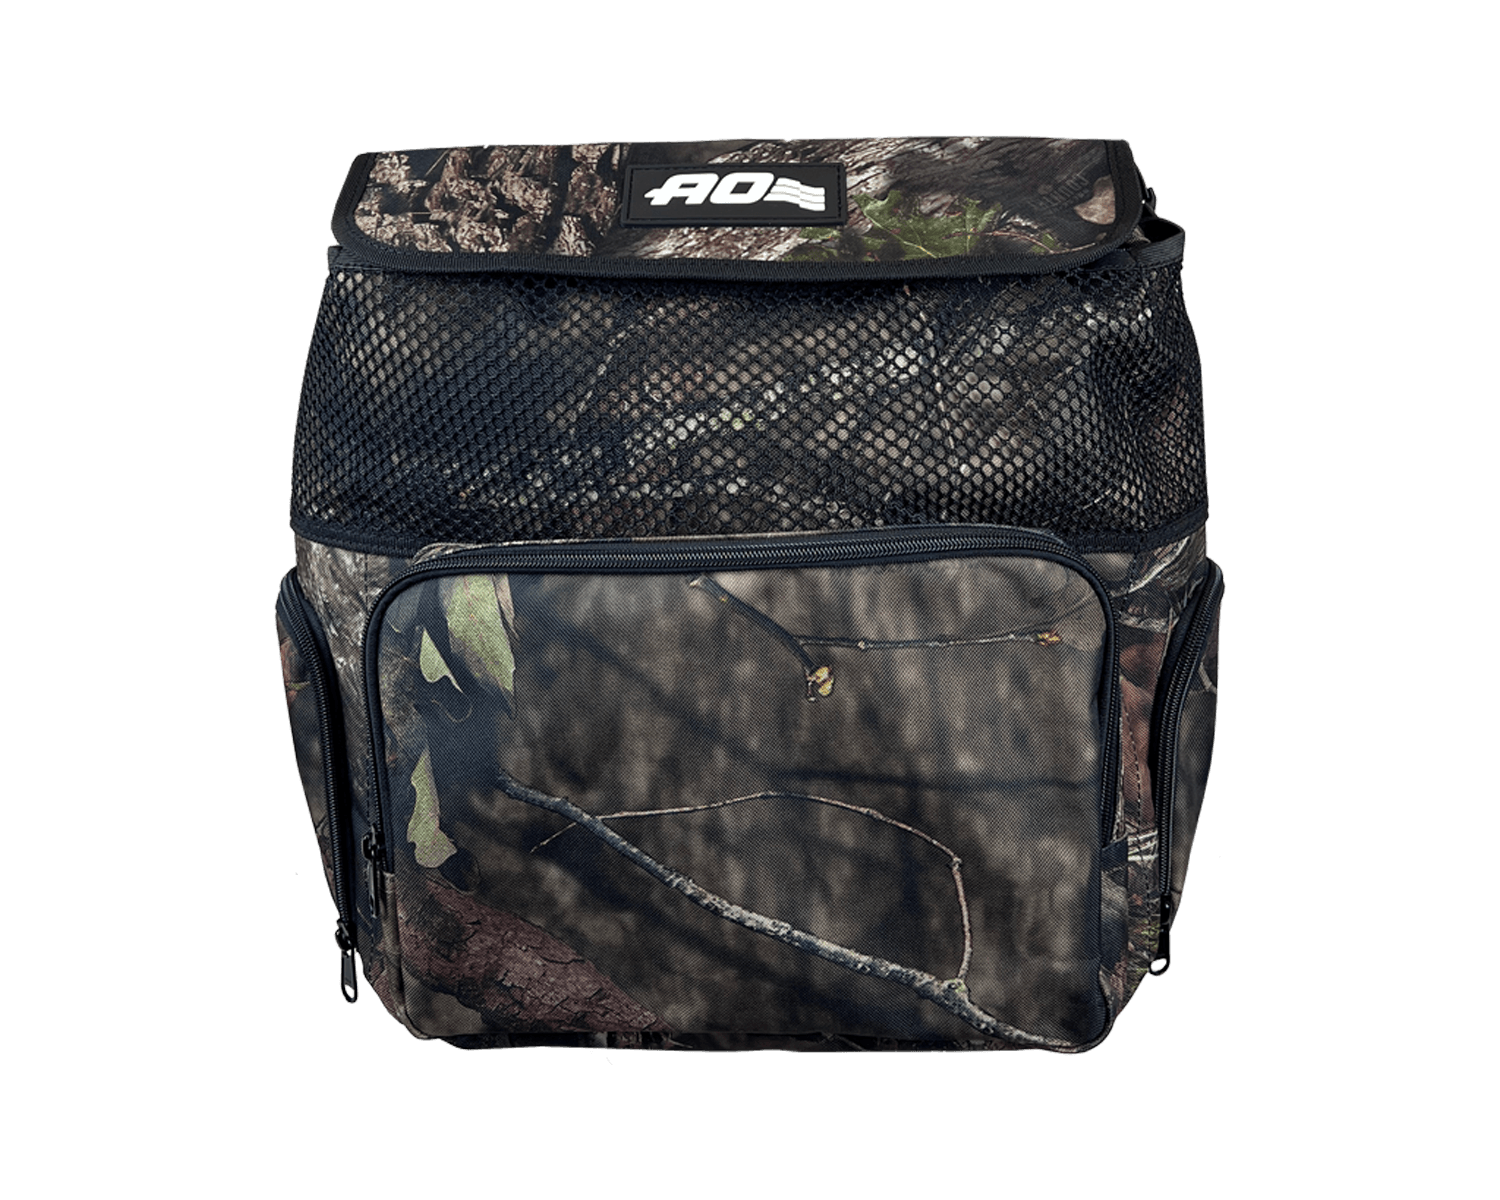 Mossy Oak Series Backpack Cooler (18 Pack) – AO Coolers